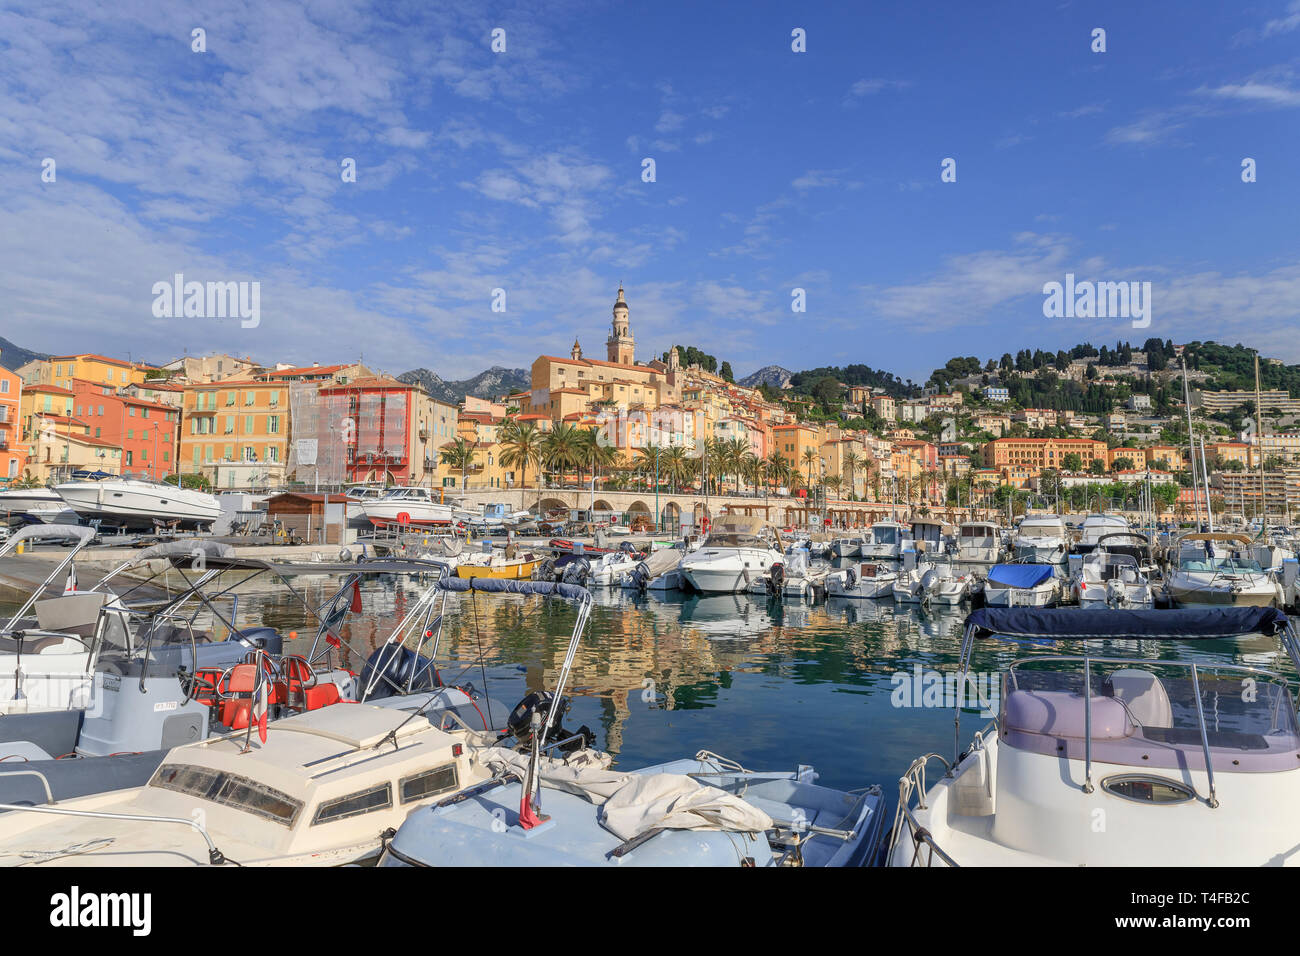 France, Alpes Maritimes, Menton, the port and the old town dominated by ...